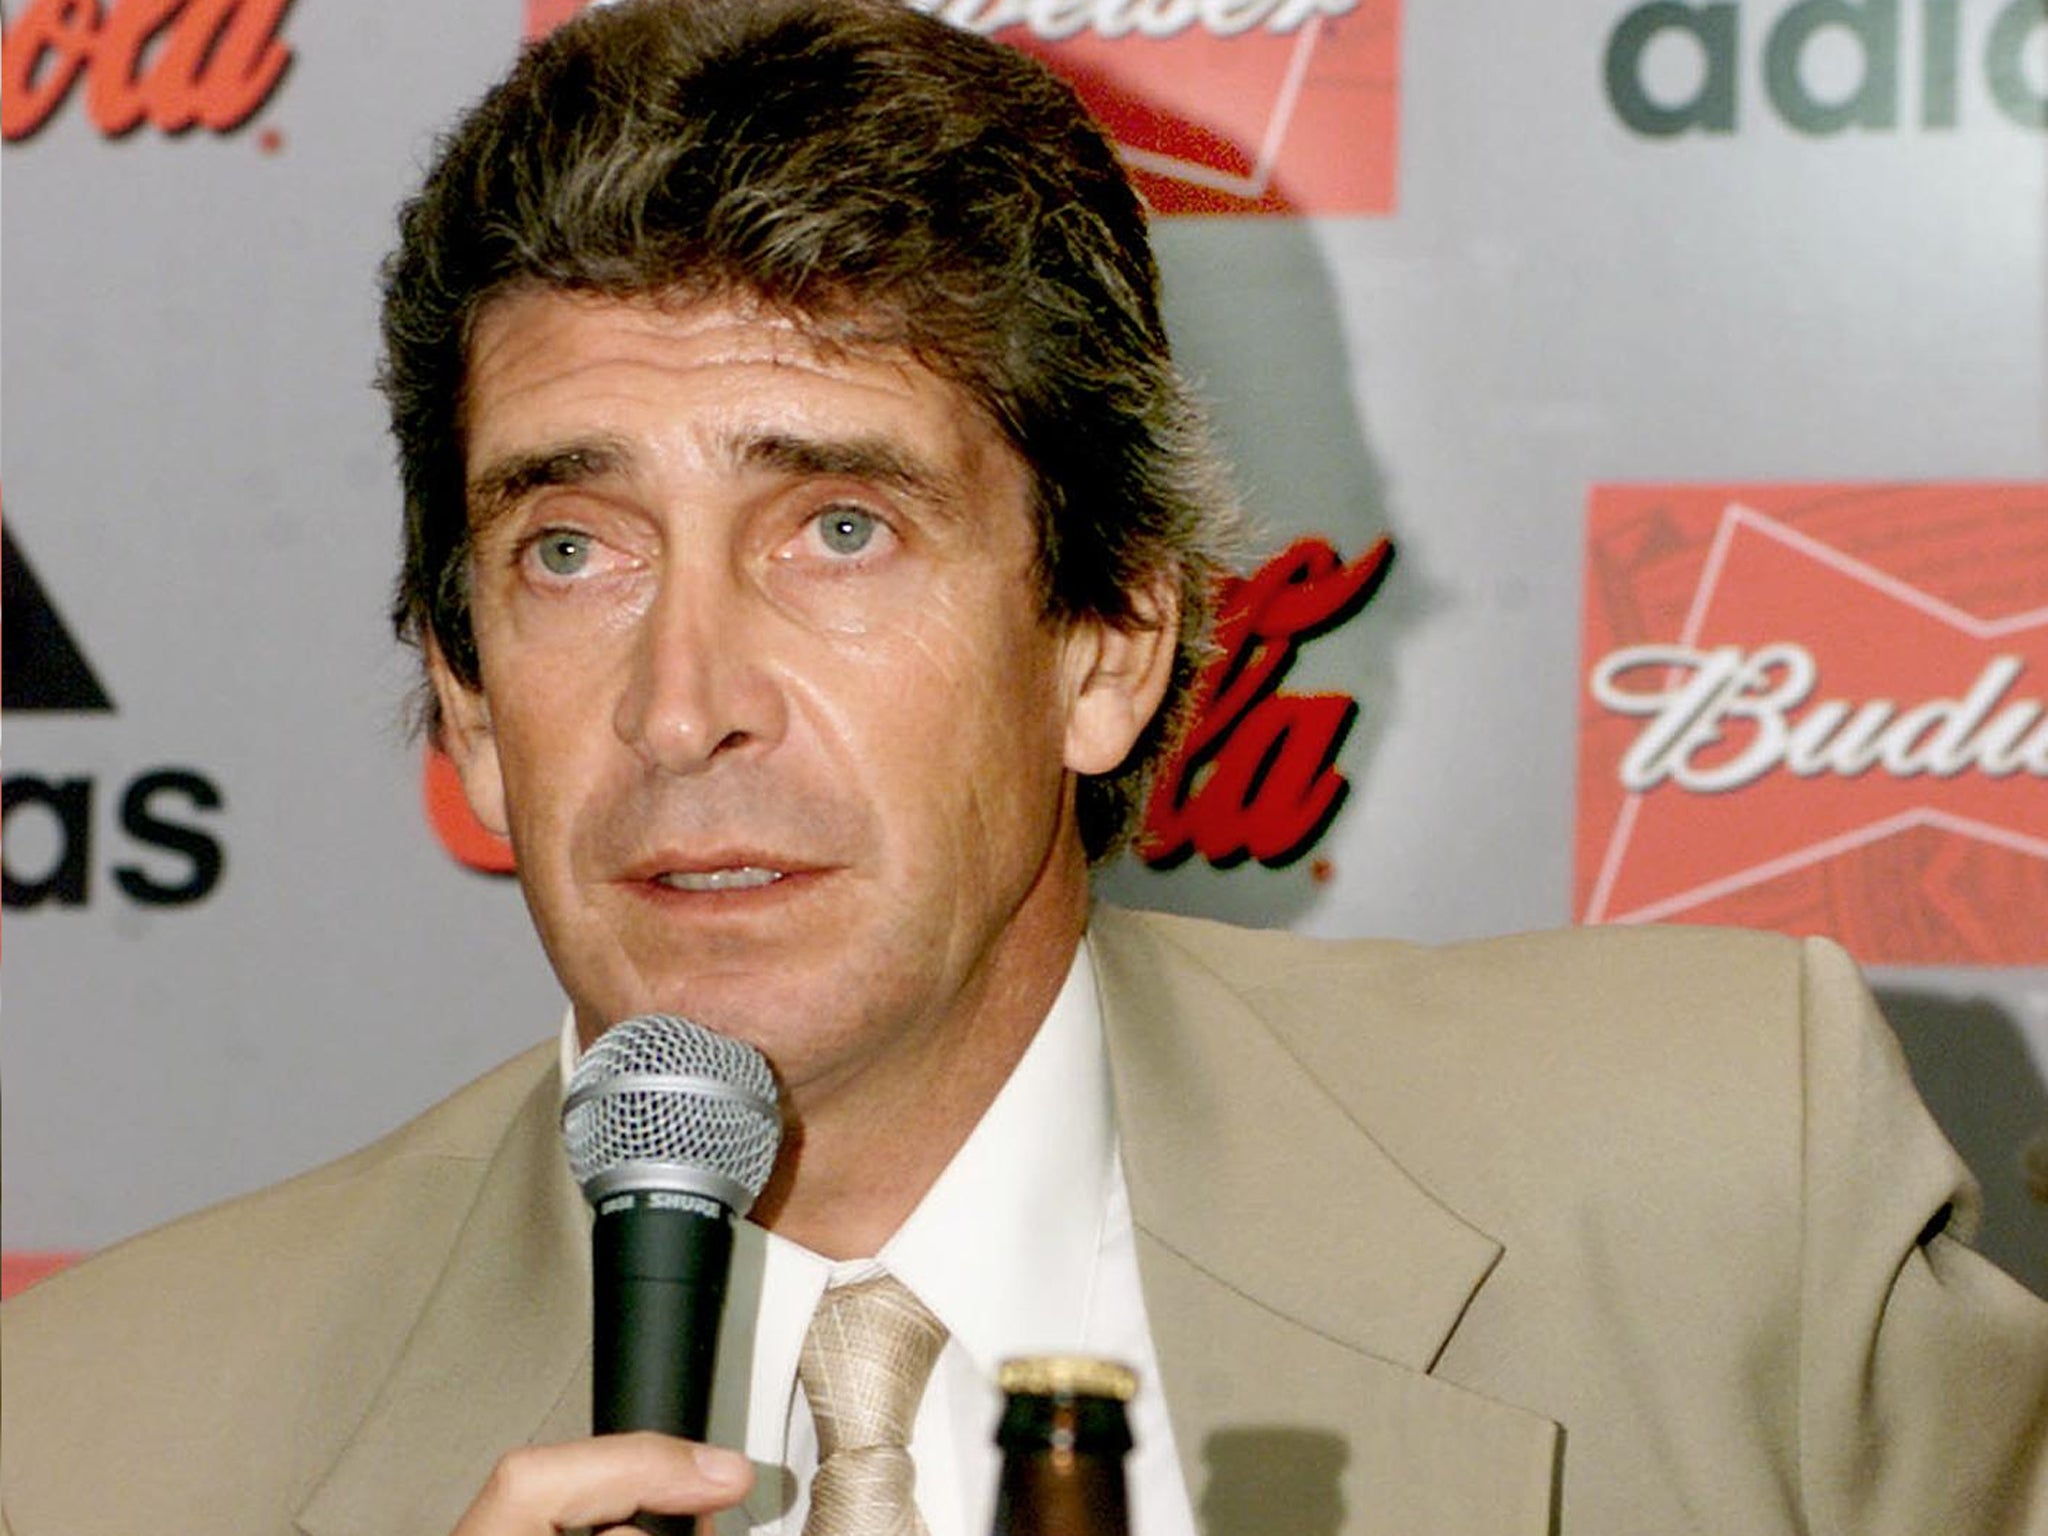 Manuel Pellegrini had to ride out some tough times to succeed at River Plate